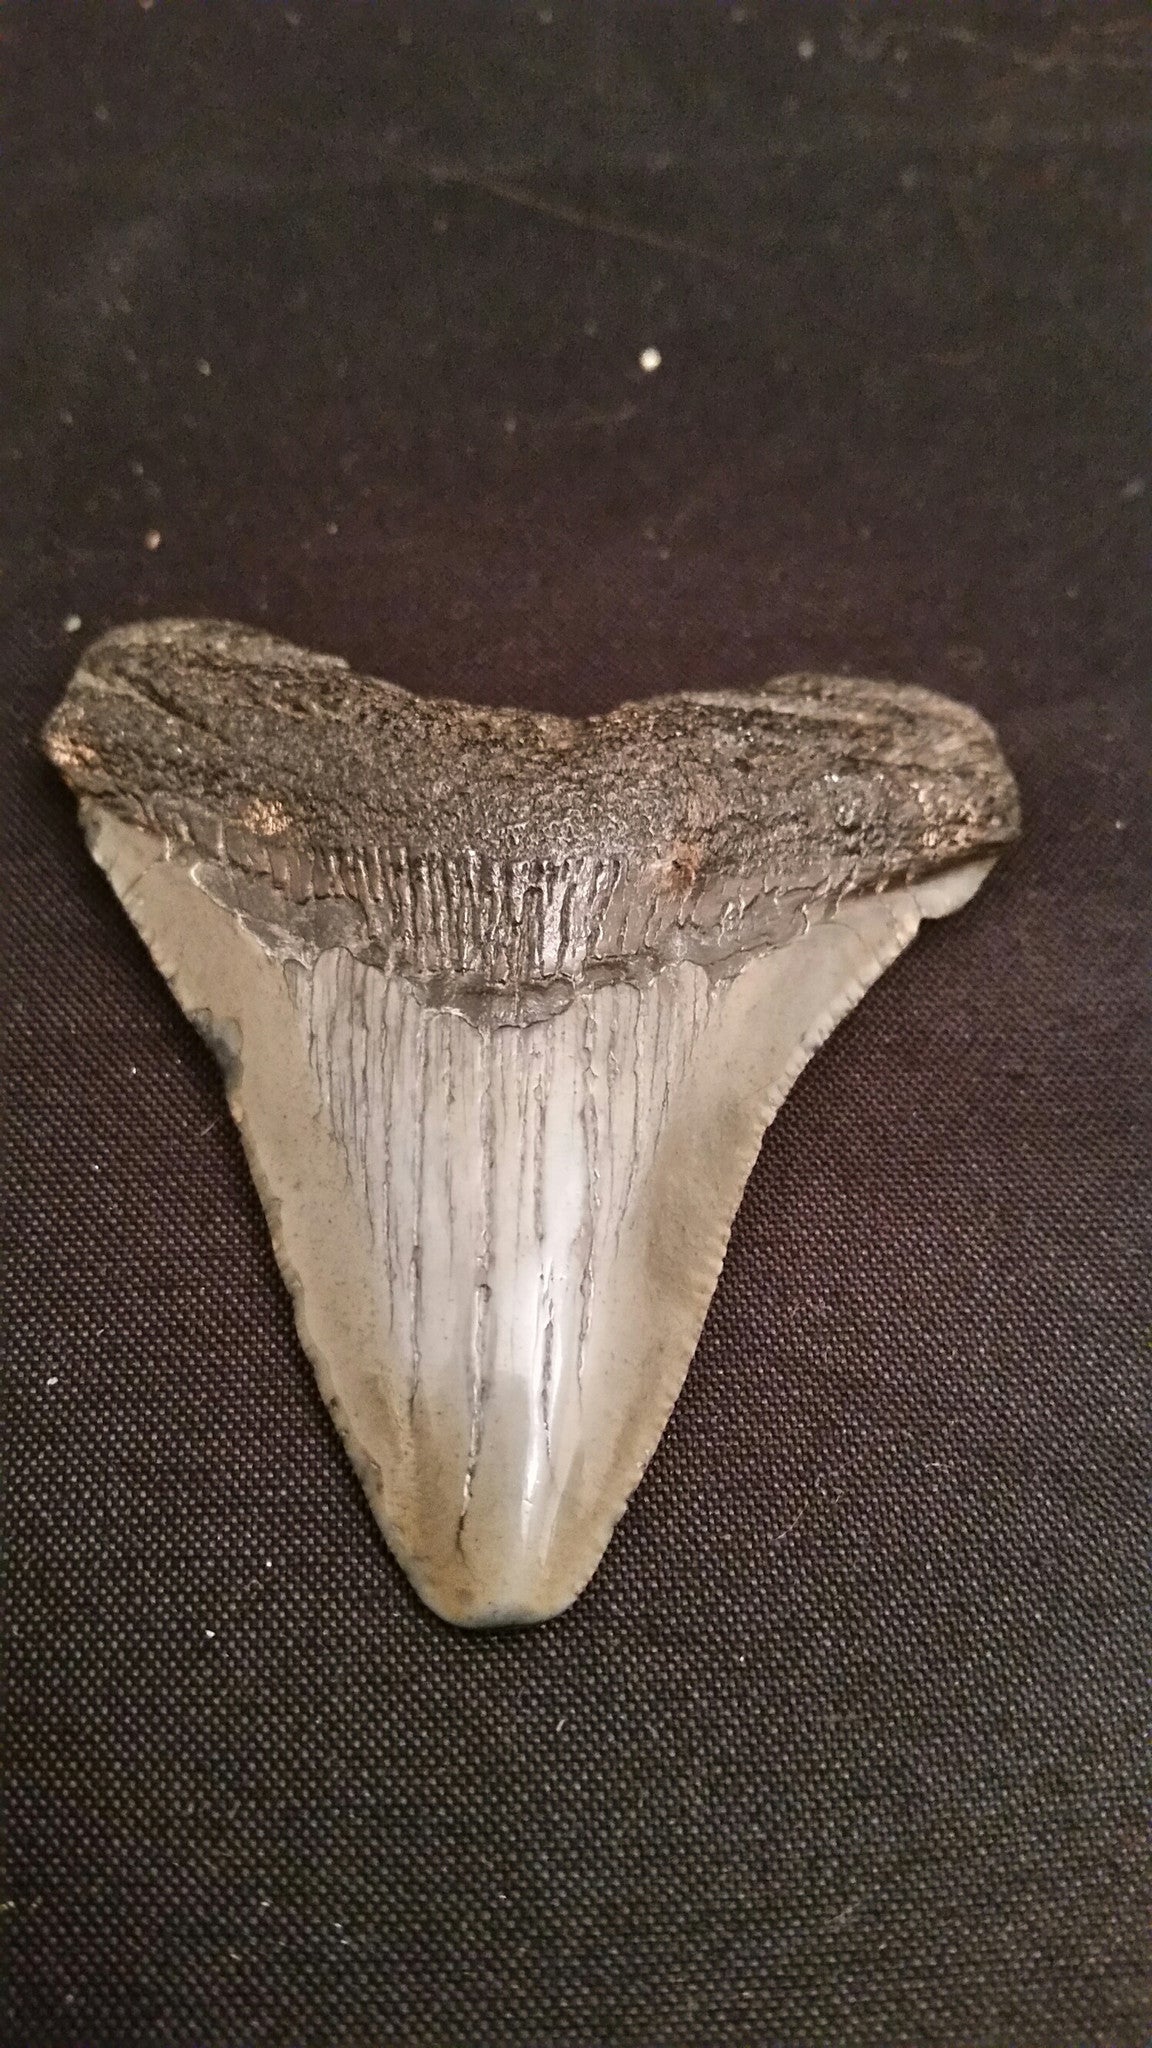 Megalodon Tooth, Item B